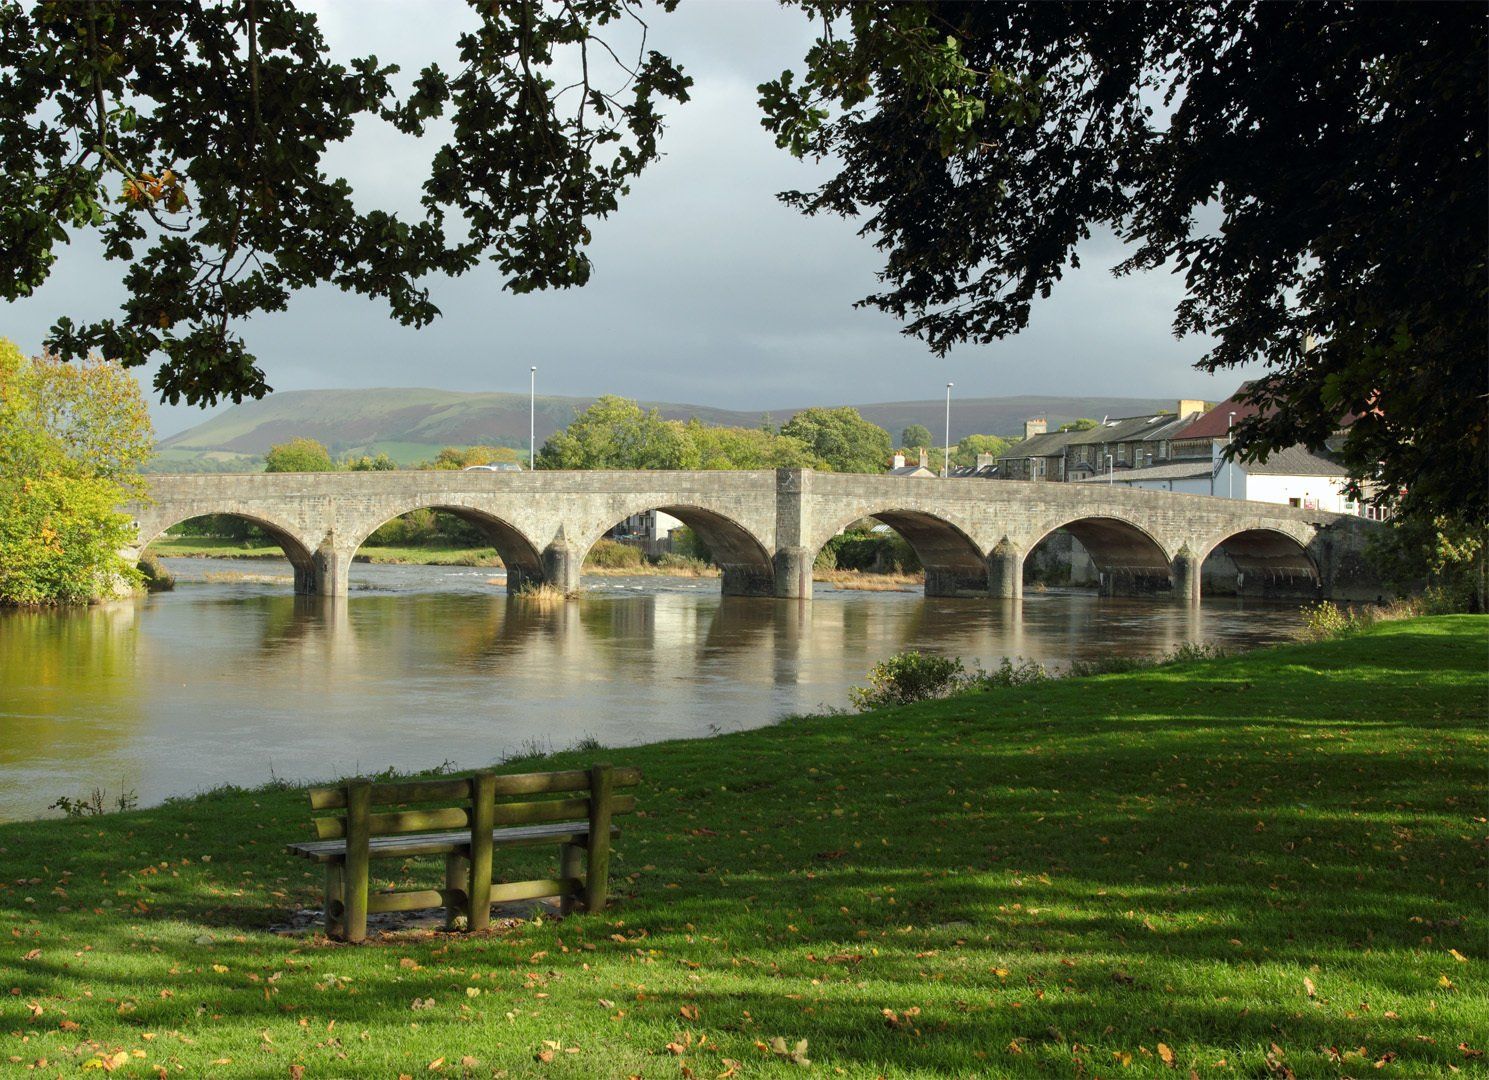 Bridge over the river Wye in Builth Wells, Wales UK.